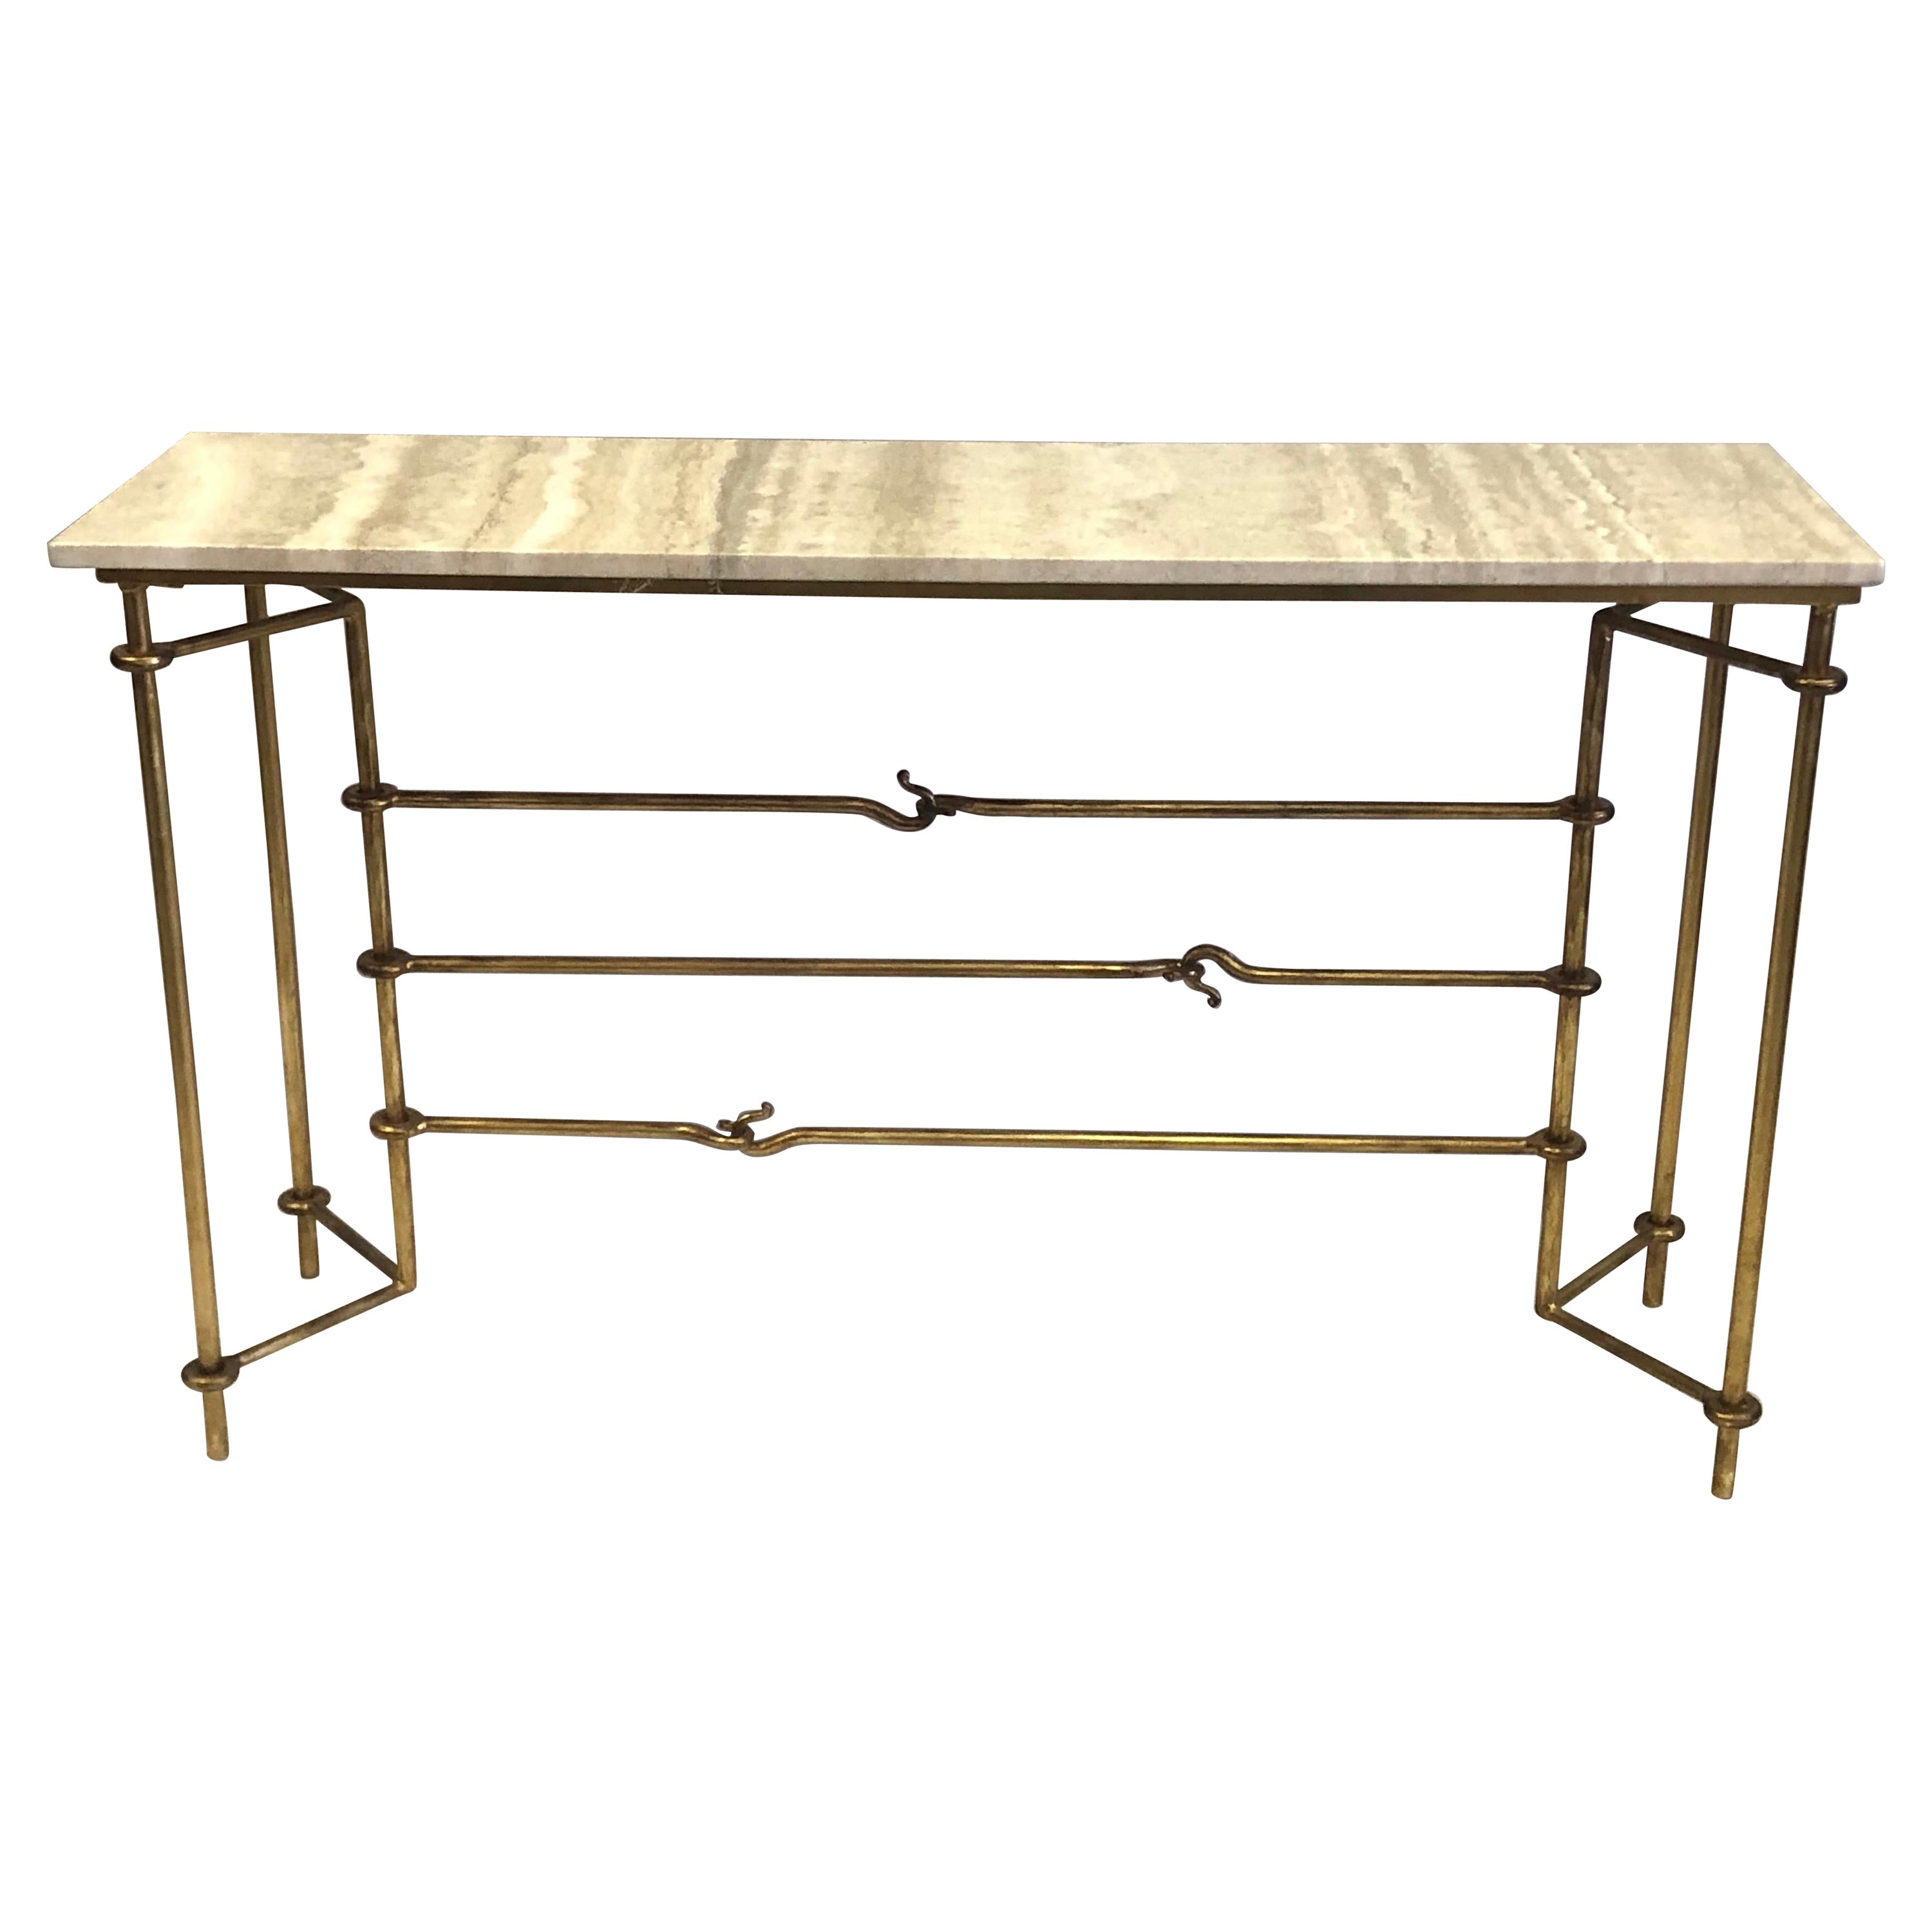 Italian Mid-Century Modern Neoclassical Gilt Iron Console by Banci for Hermès For Sale